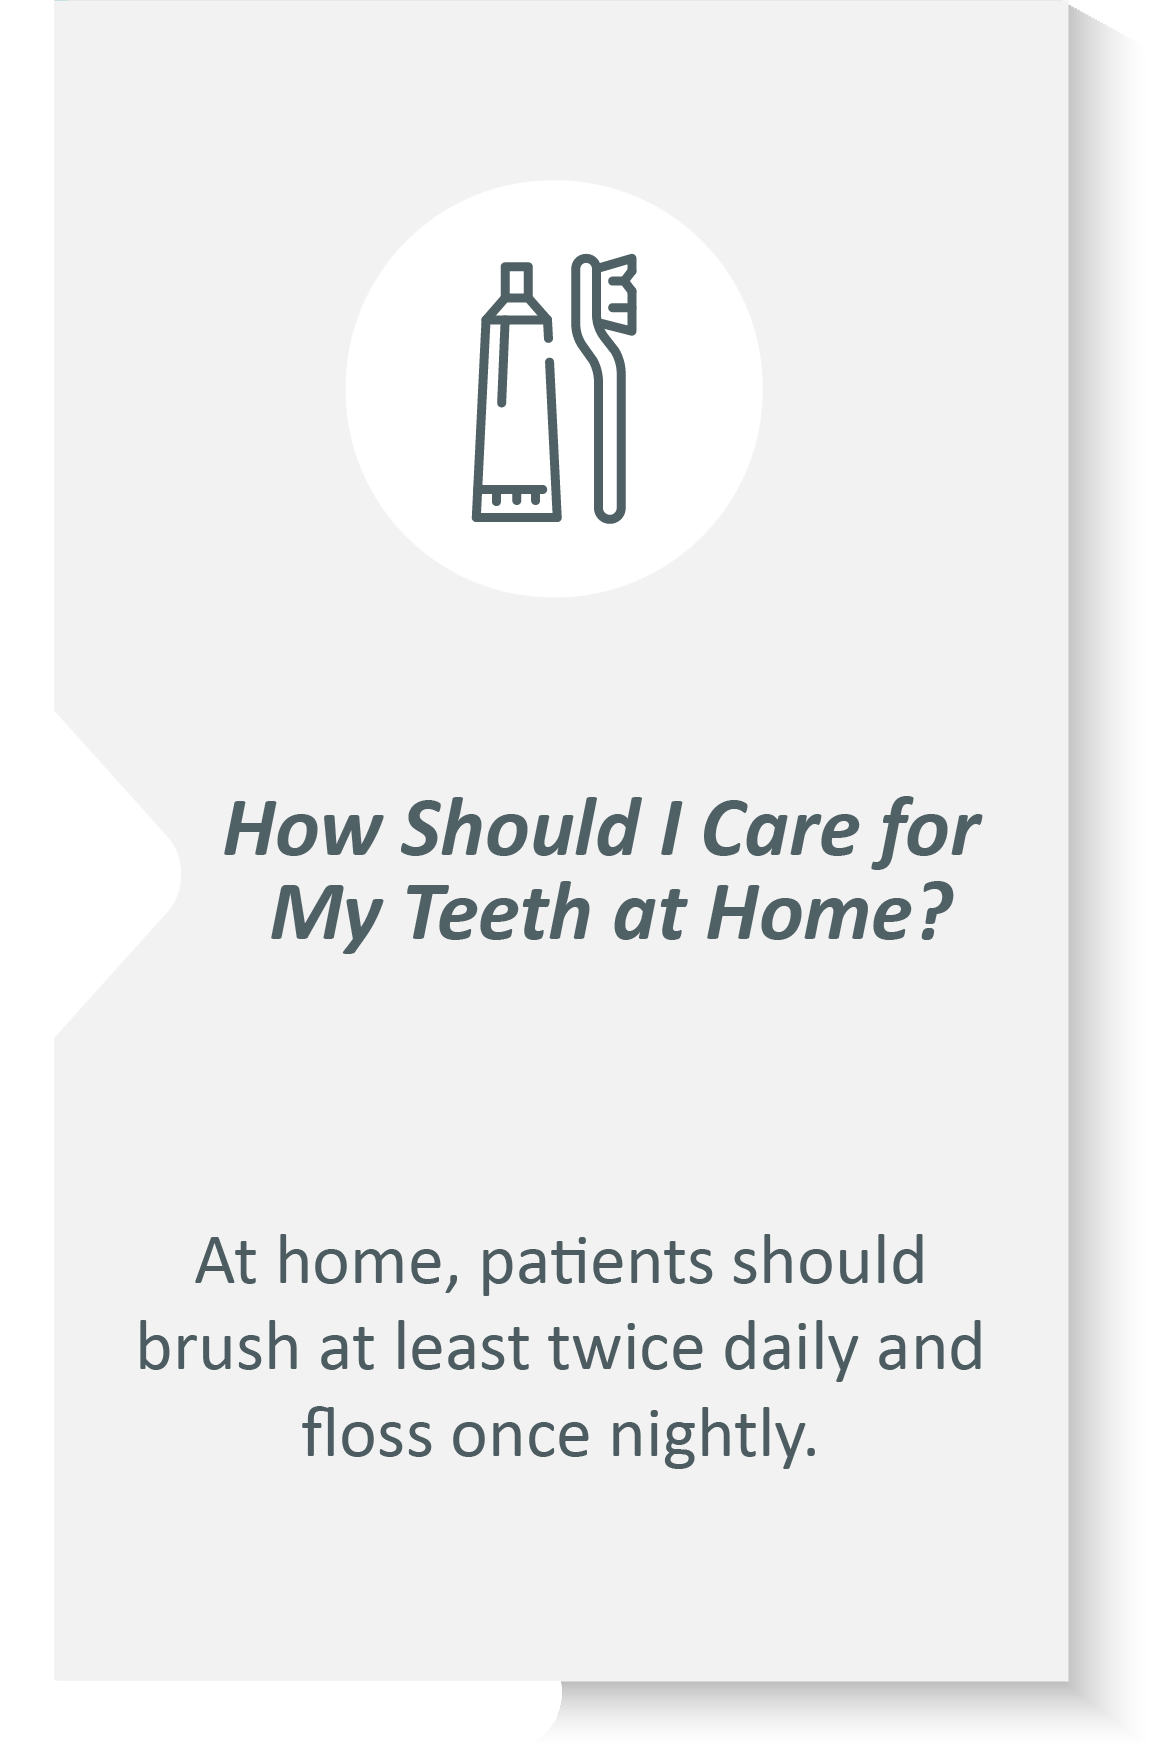 Dental cleaning infographic: At home, patients should brush at least twice daily and floss once nightly.